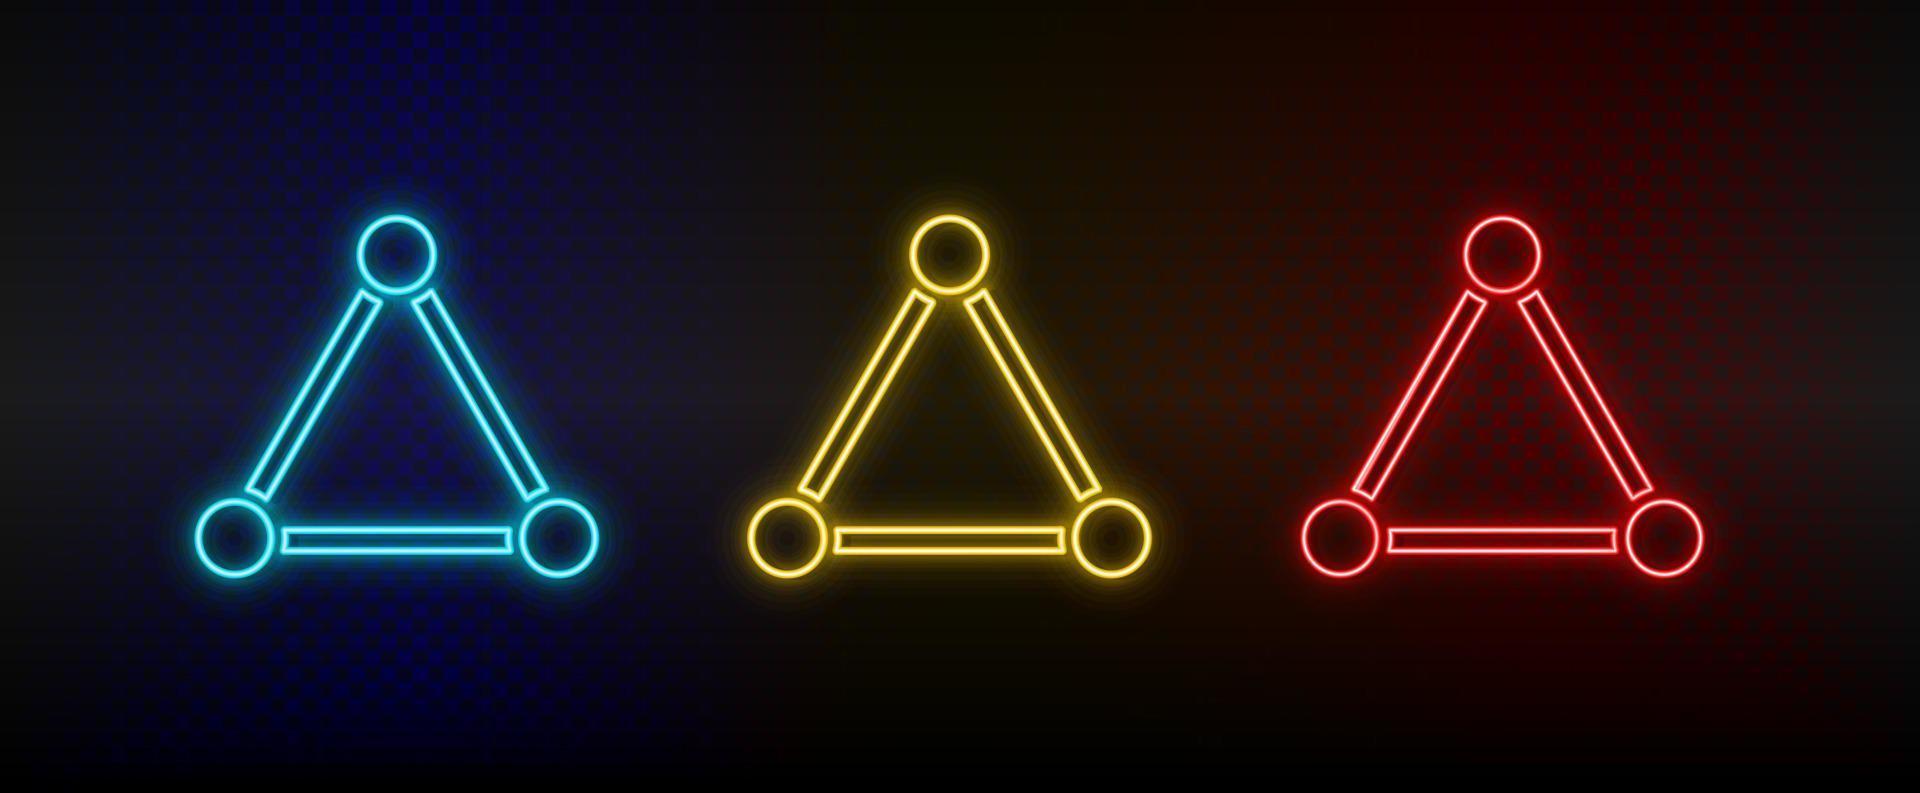 Neon icon set connection, network. Set of red, blue, yellow neon vector icon on dark transparent background